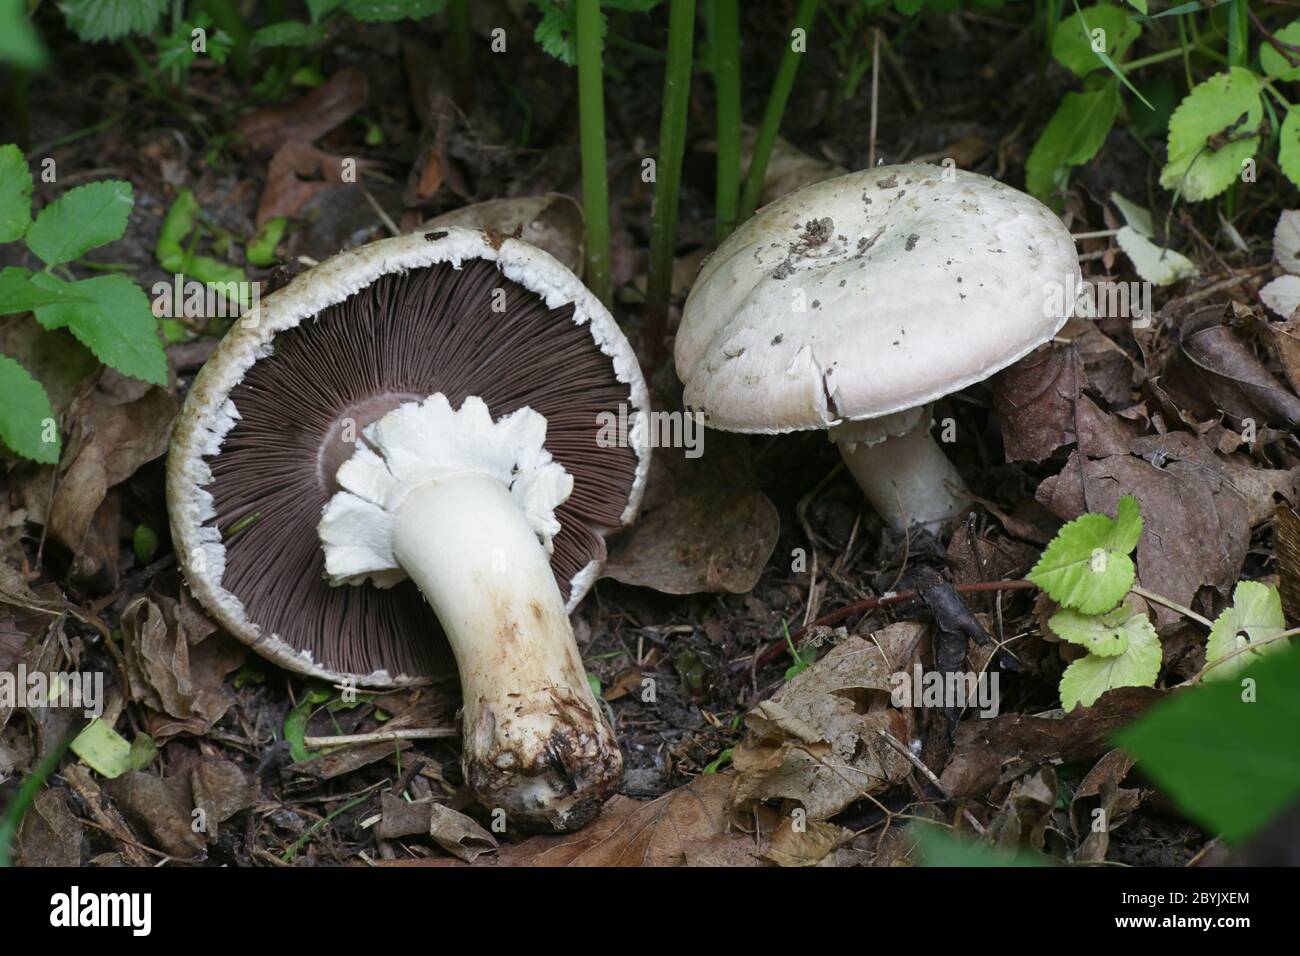 Agaricus arvensis, commonly known as the horse mushroom, wild edible mushroom from Finland Stock Photo